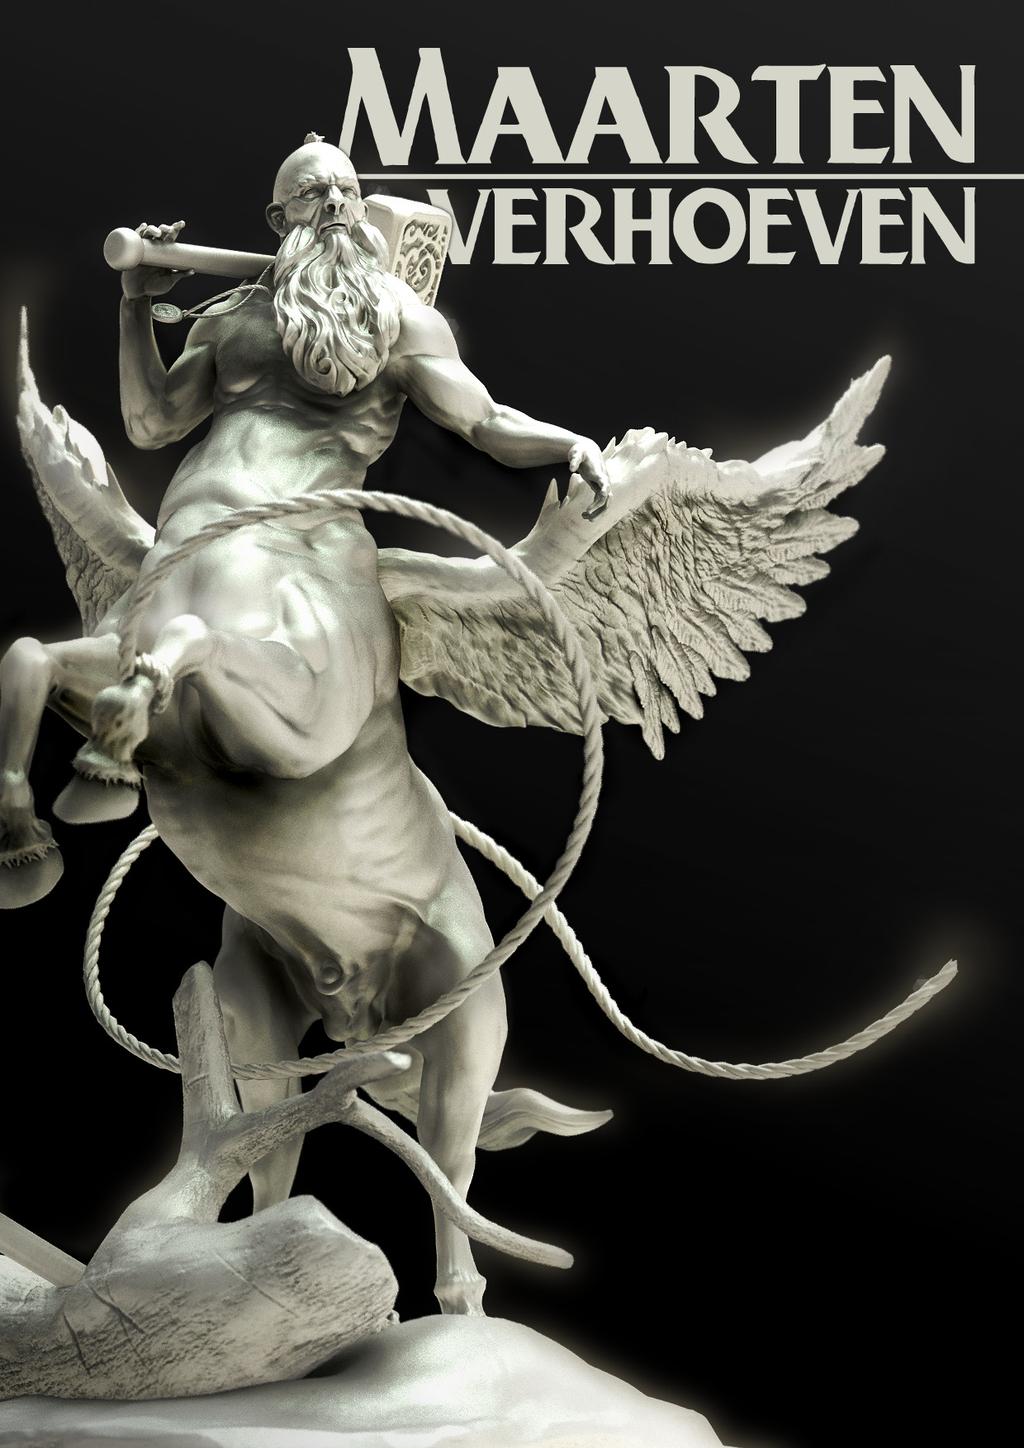 Maarten Verhoeven is a 3D artist who specializes in character sculpting and has a passion for film and monsters.